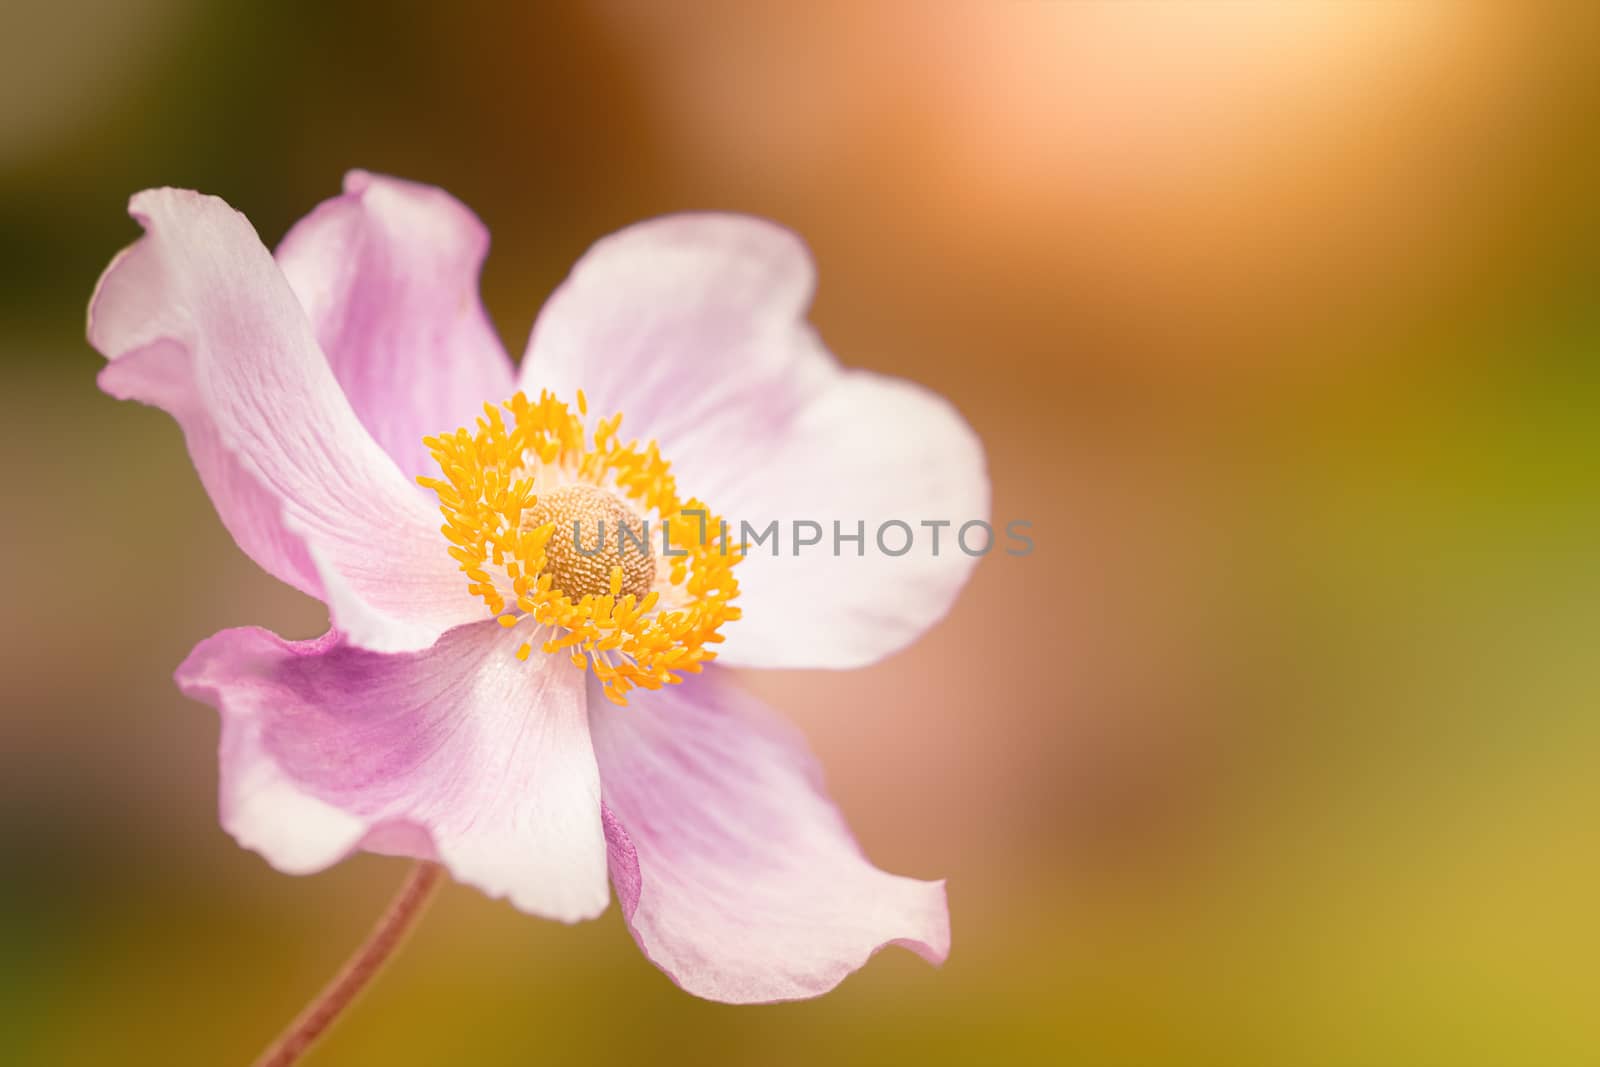 An image of a Anemone hupehensis pink flower